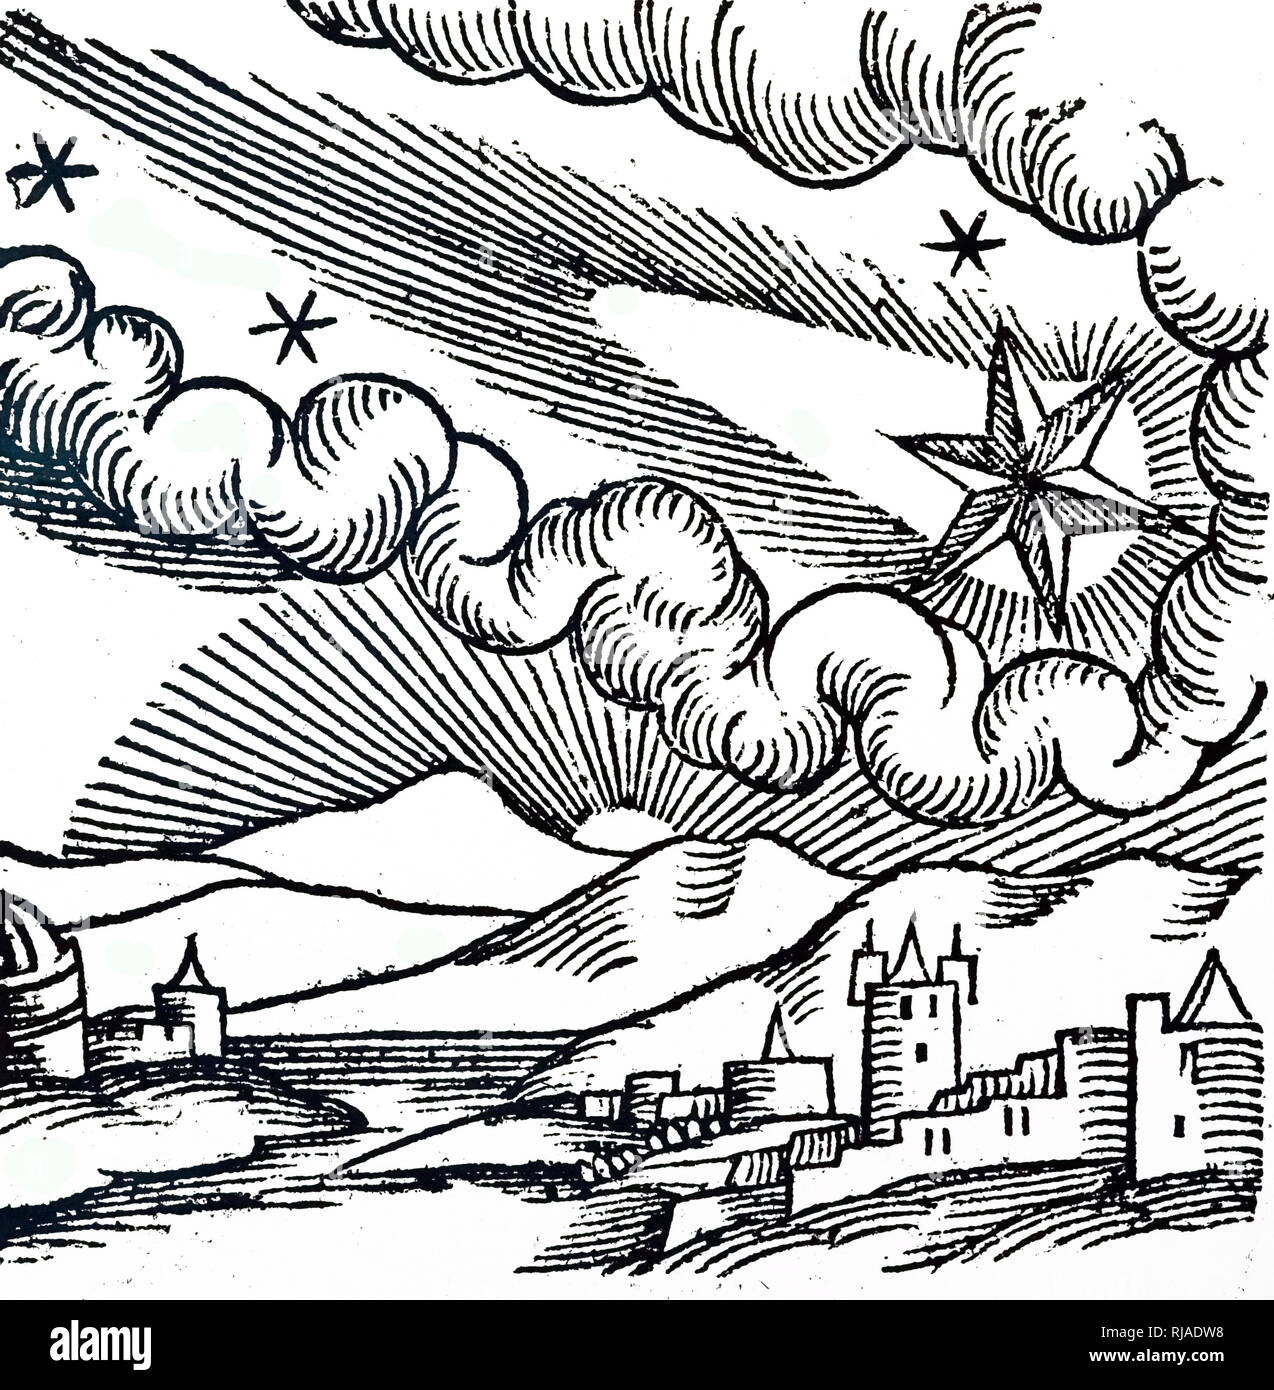 A woodcut engraving depicting The Great Comet of 1456 (Halley's Comet): Pope Calixtus III excommunicated this comet. Dated 16th century Stock Photo